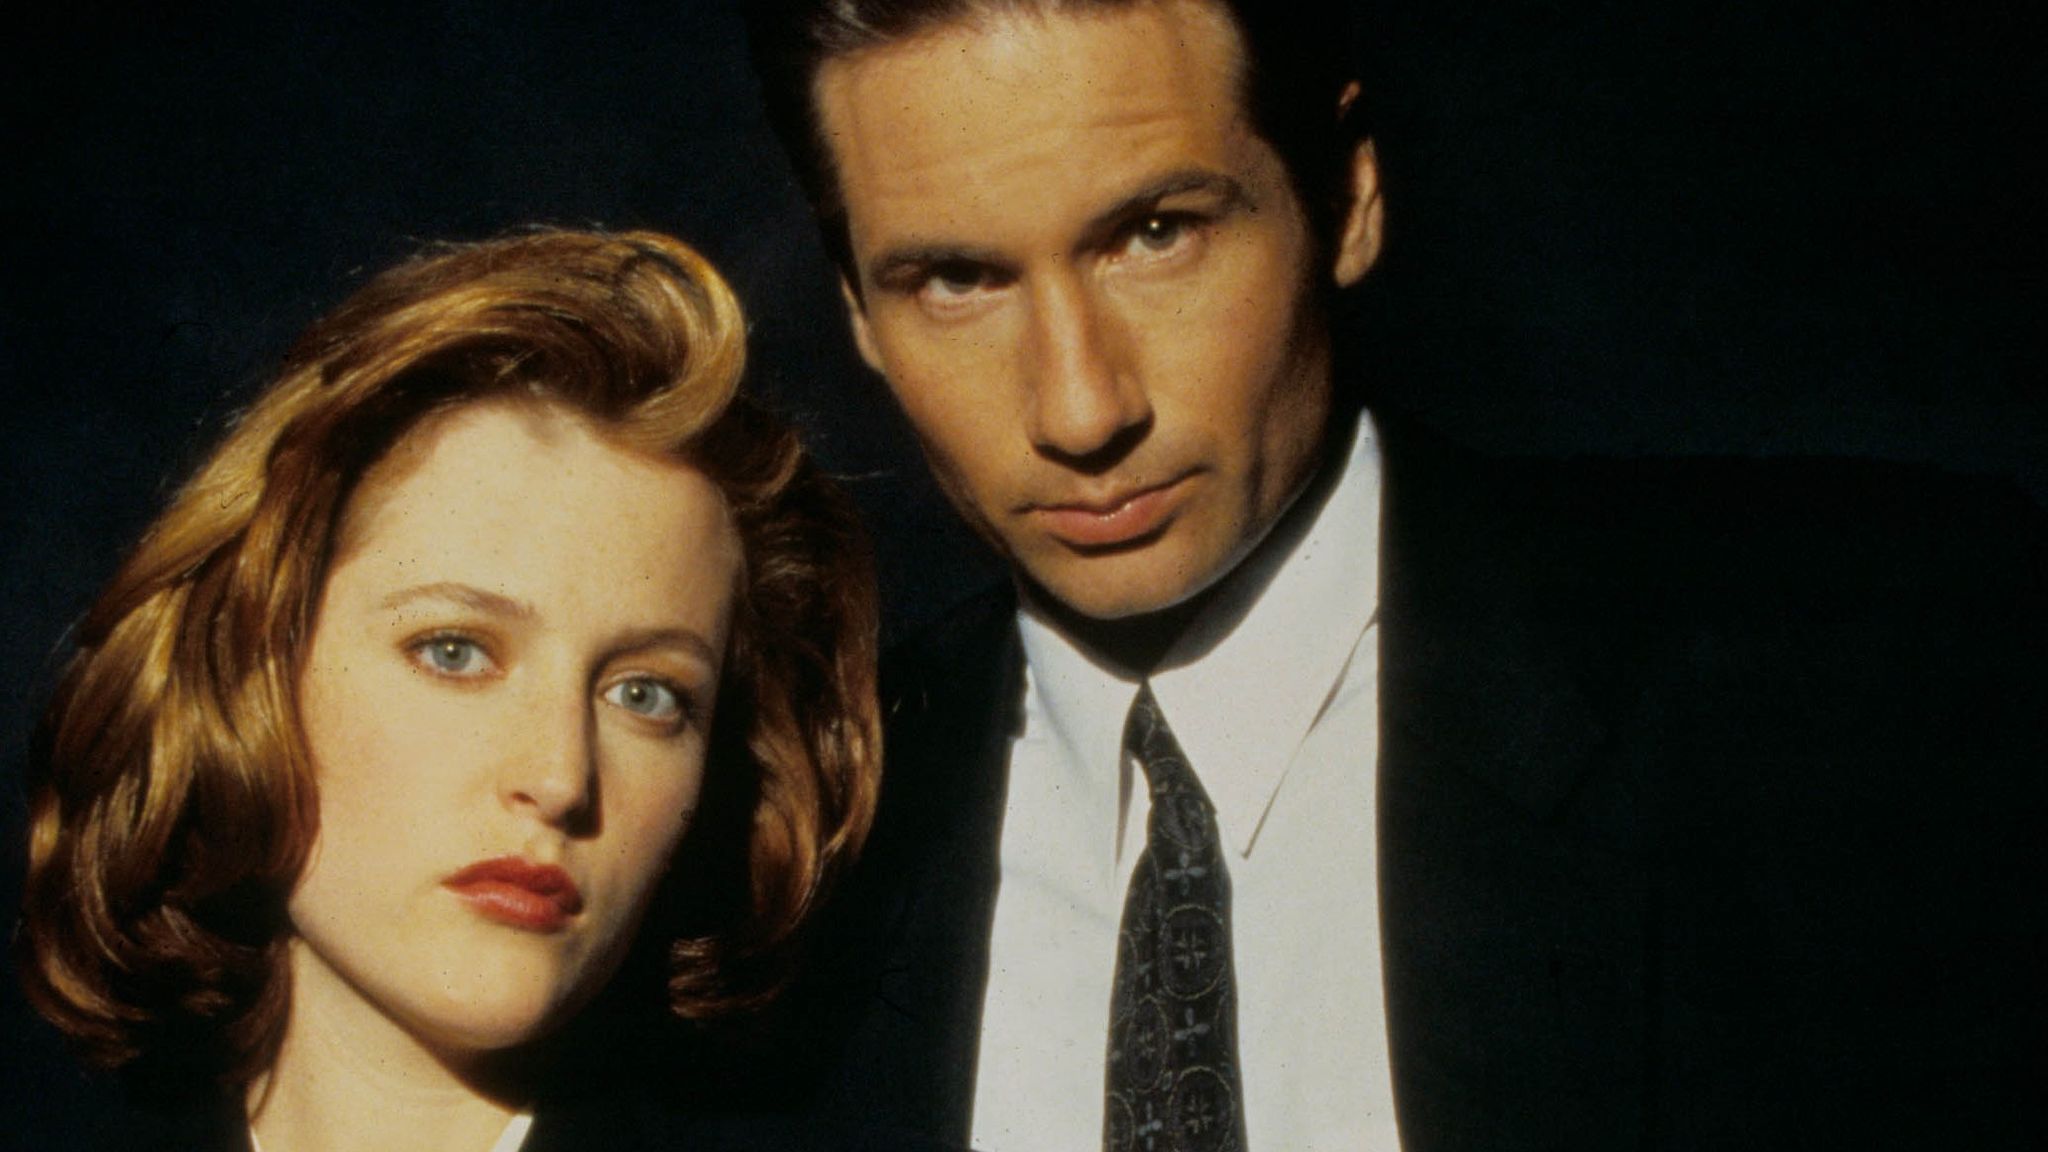 THE X FILES (X-ファイル) SCULLY \u0026 MULDER